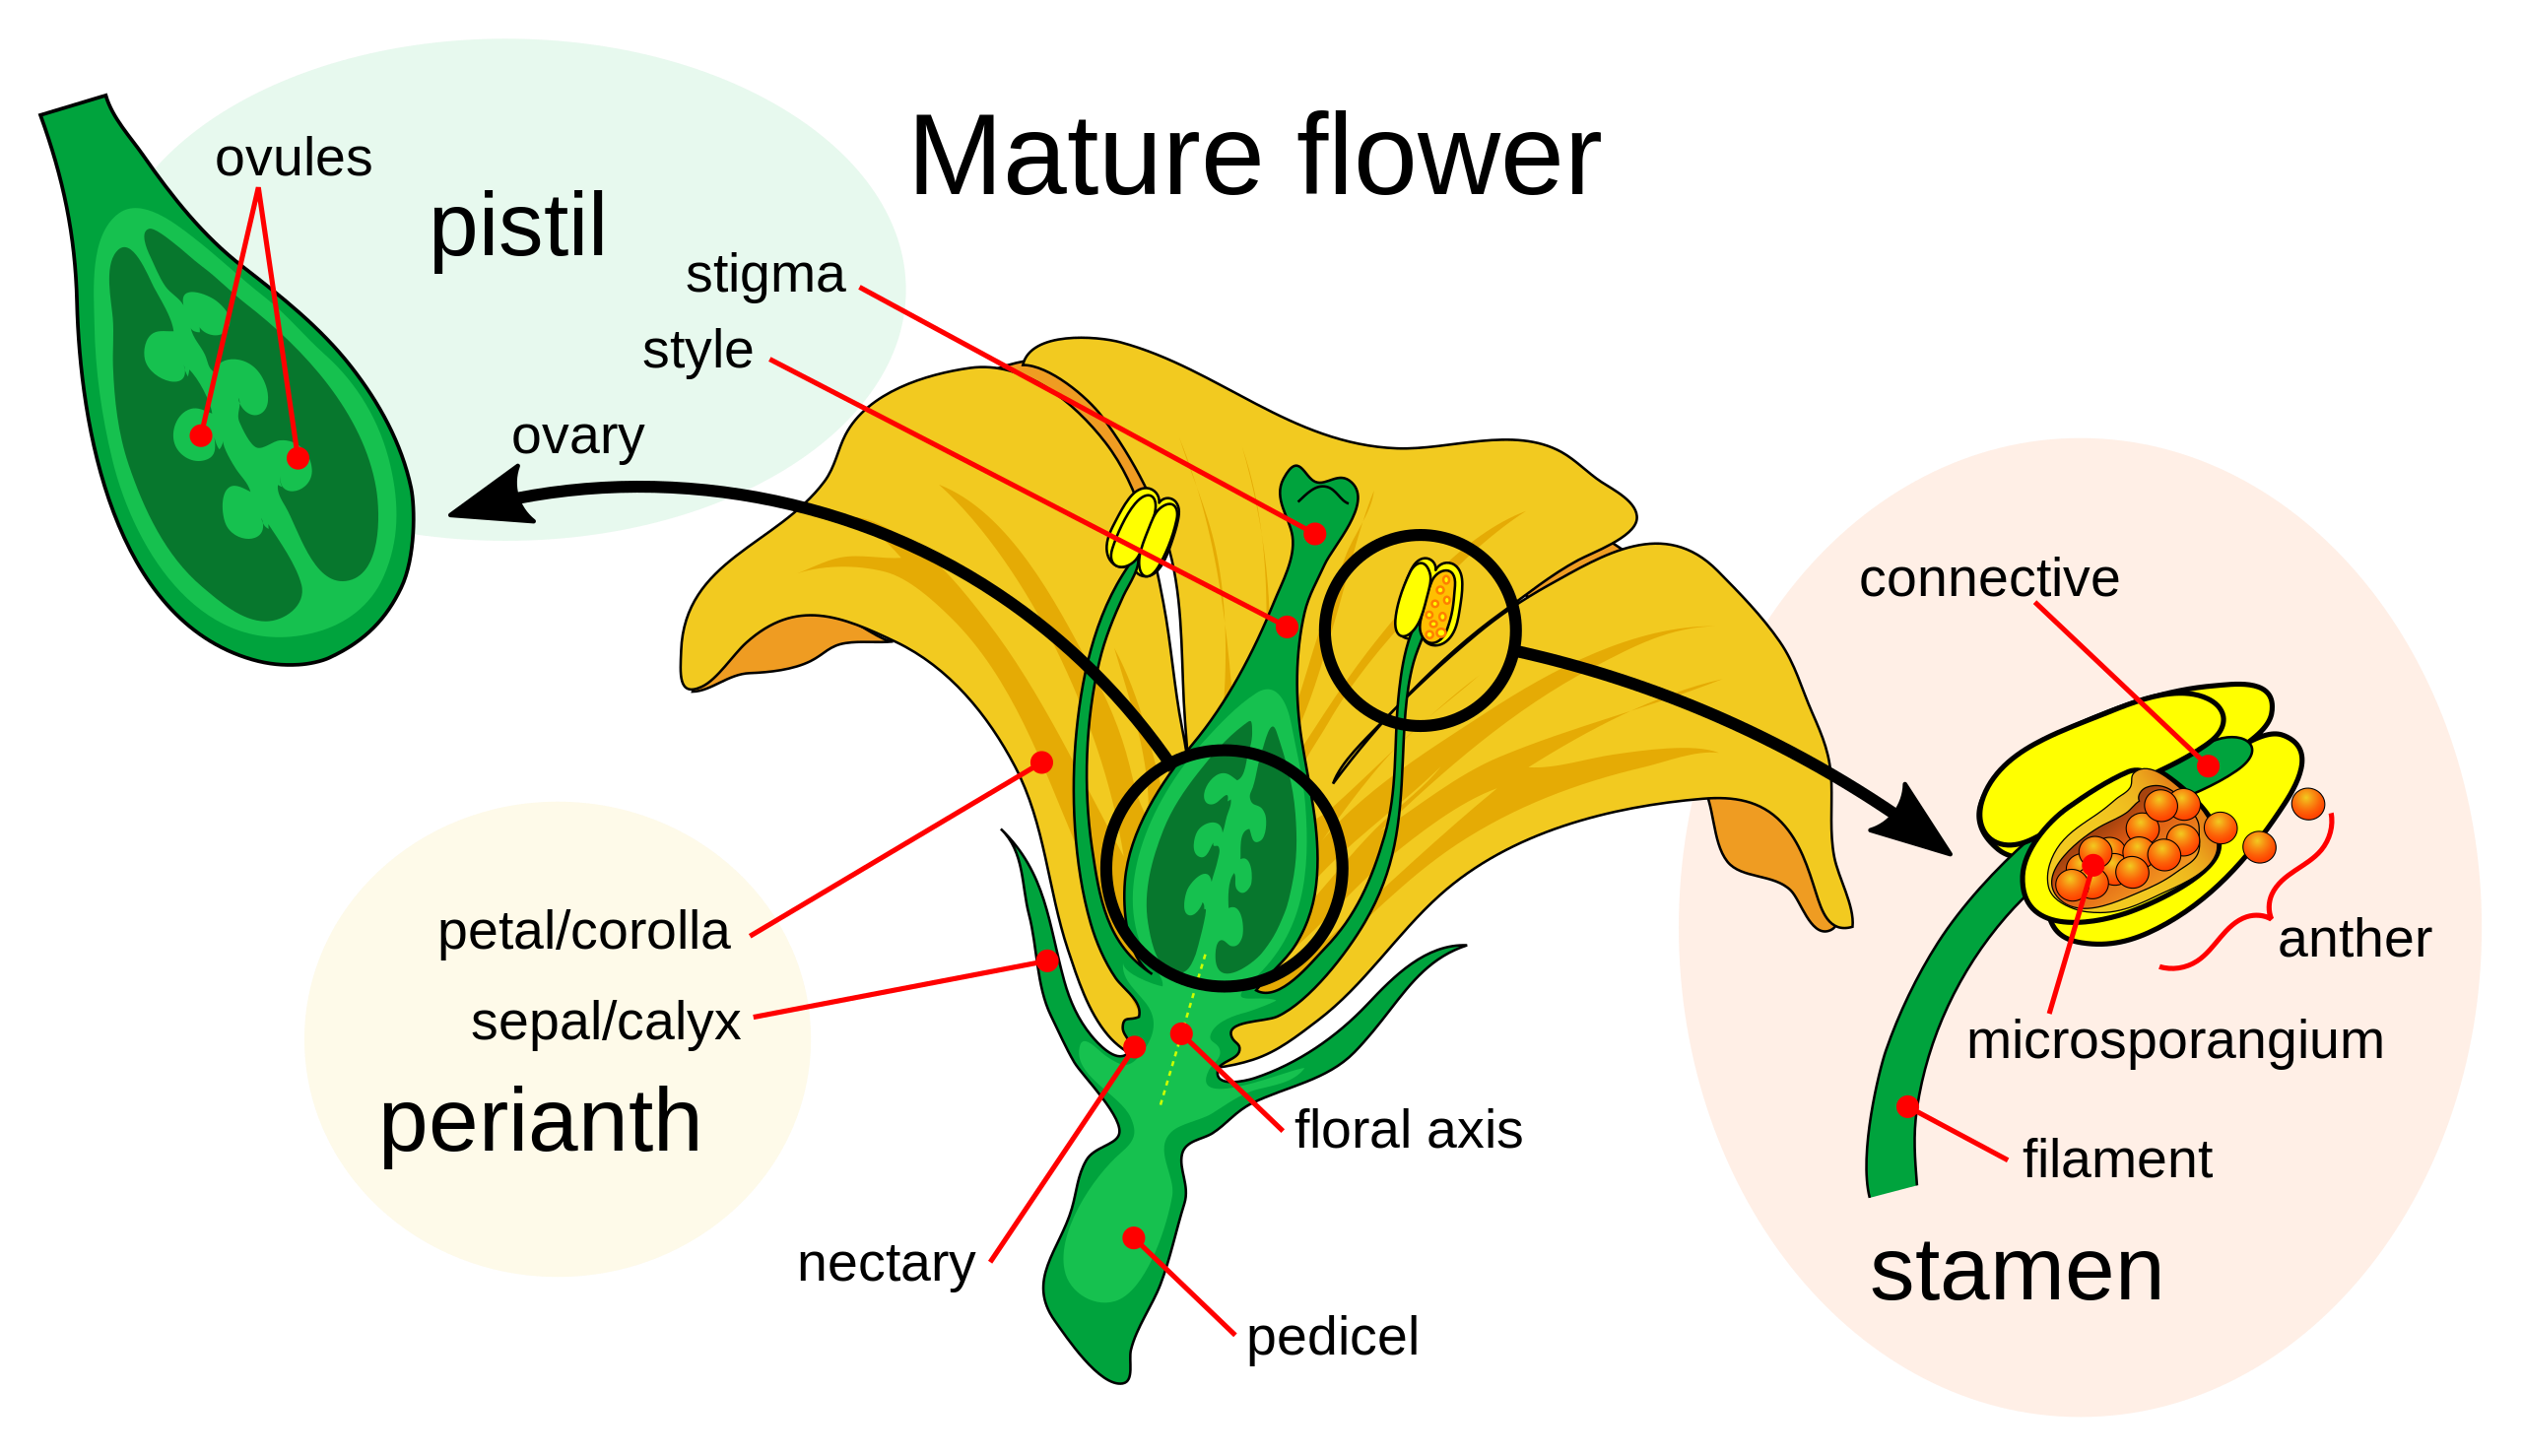 Diagram of a flower